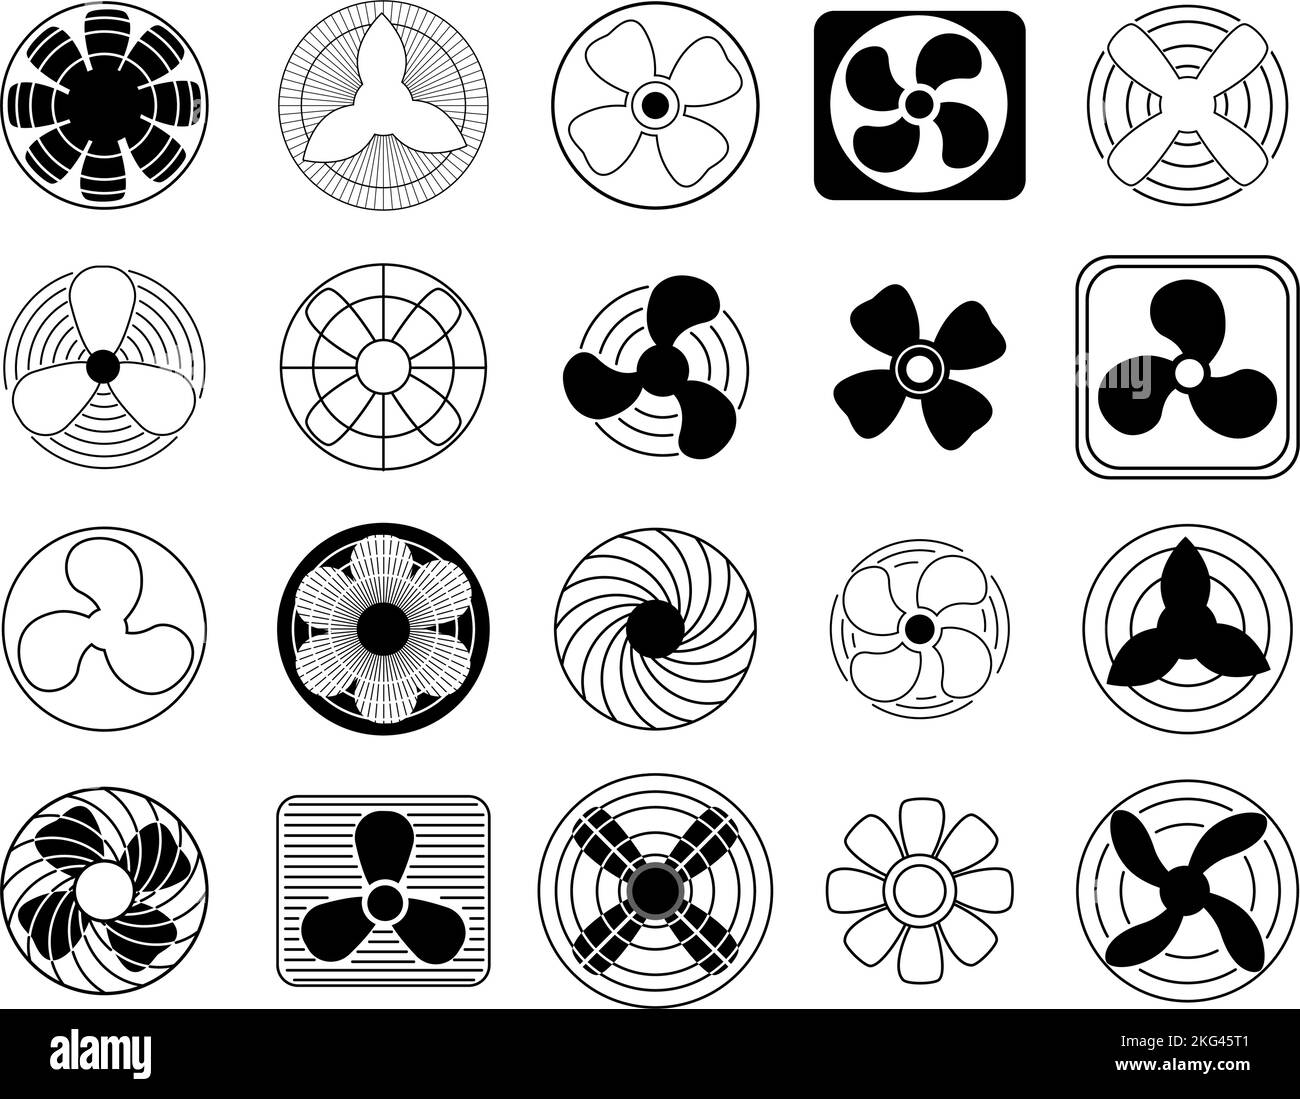 Cooling fans. Cool propeller blades, climate equipment symbols and electric wind fan. Computer coolers vector icon set Stock Vector